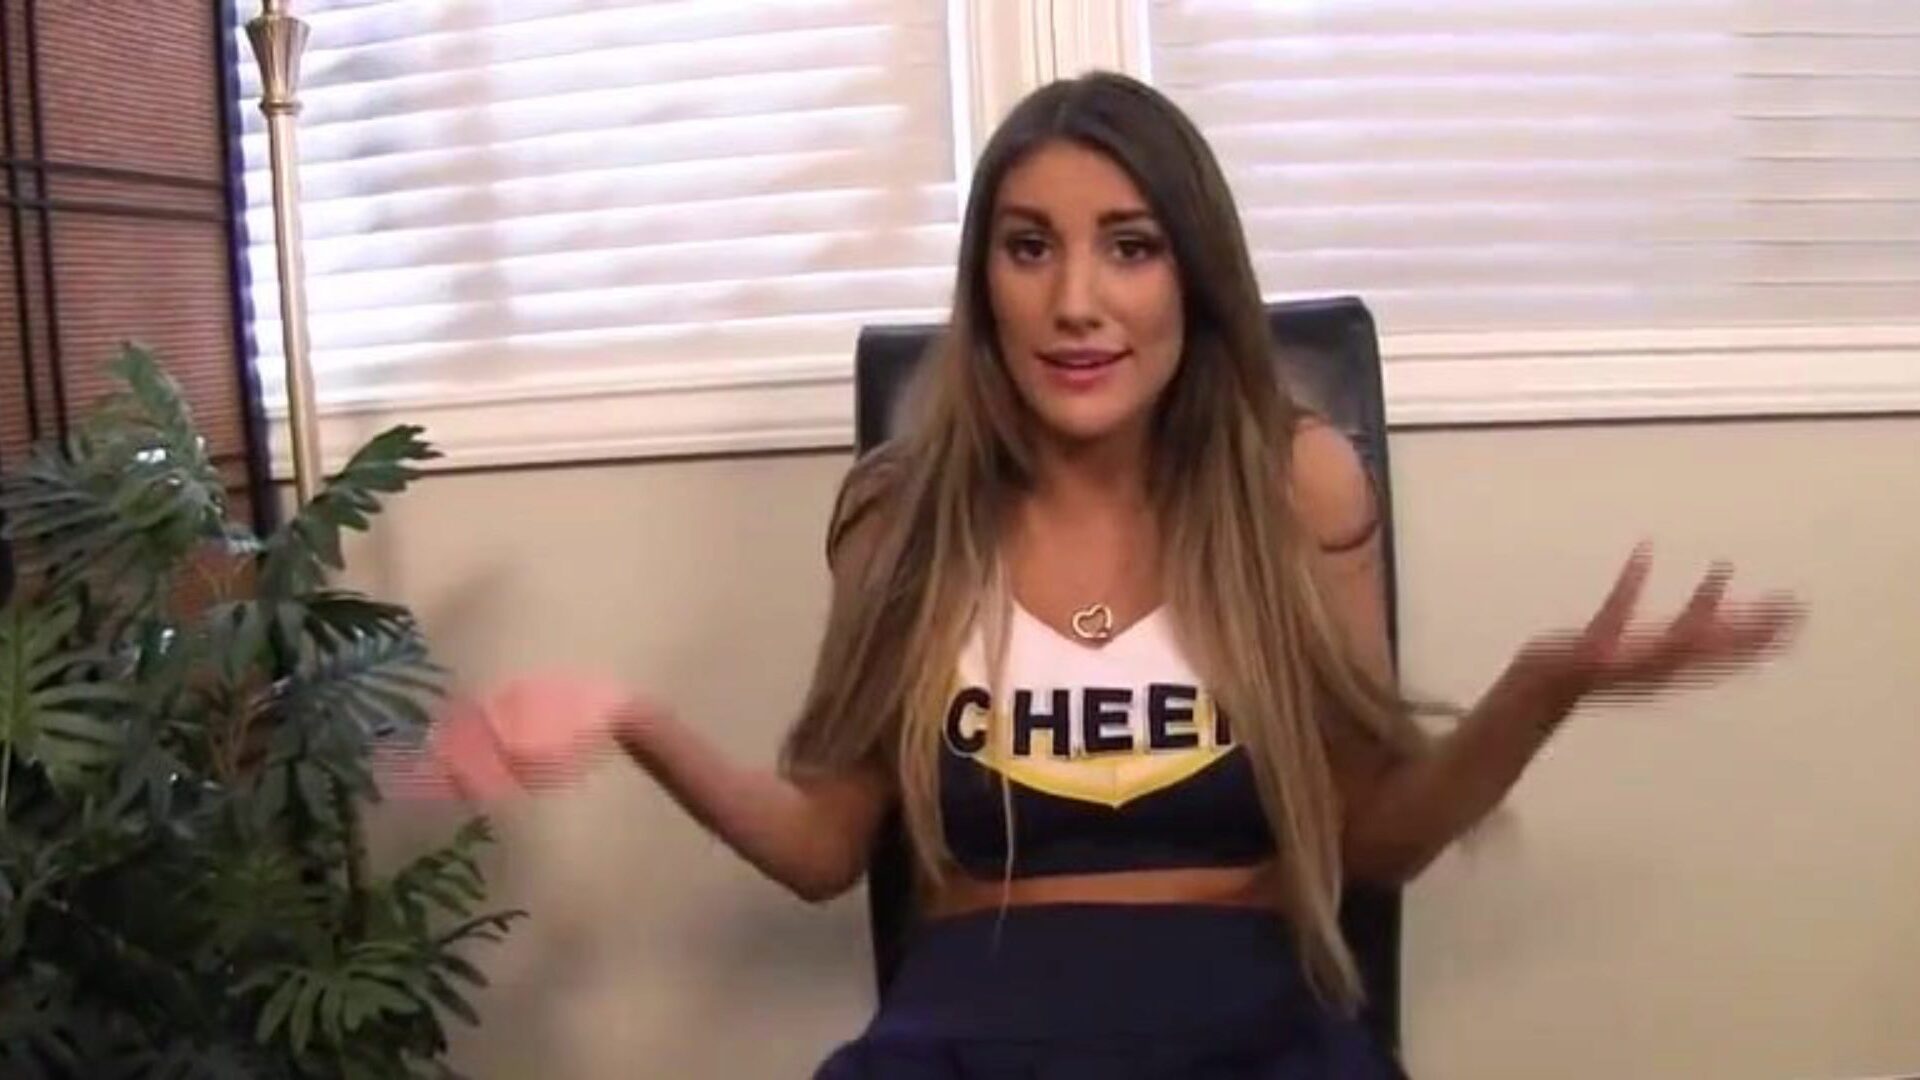 Hot Cheerleader With Biggest Mambos Does HAWT JOI To Stay On The Team - August Ames